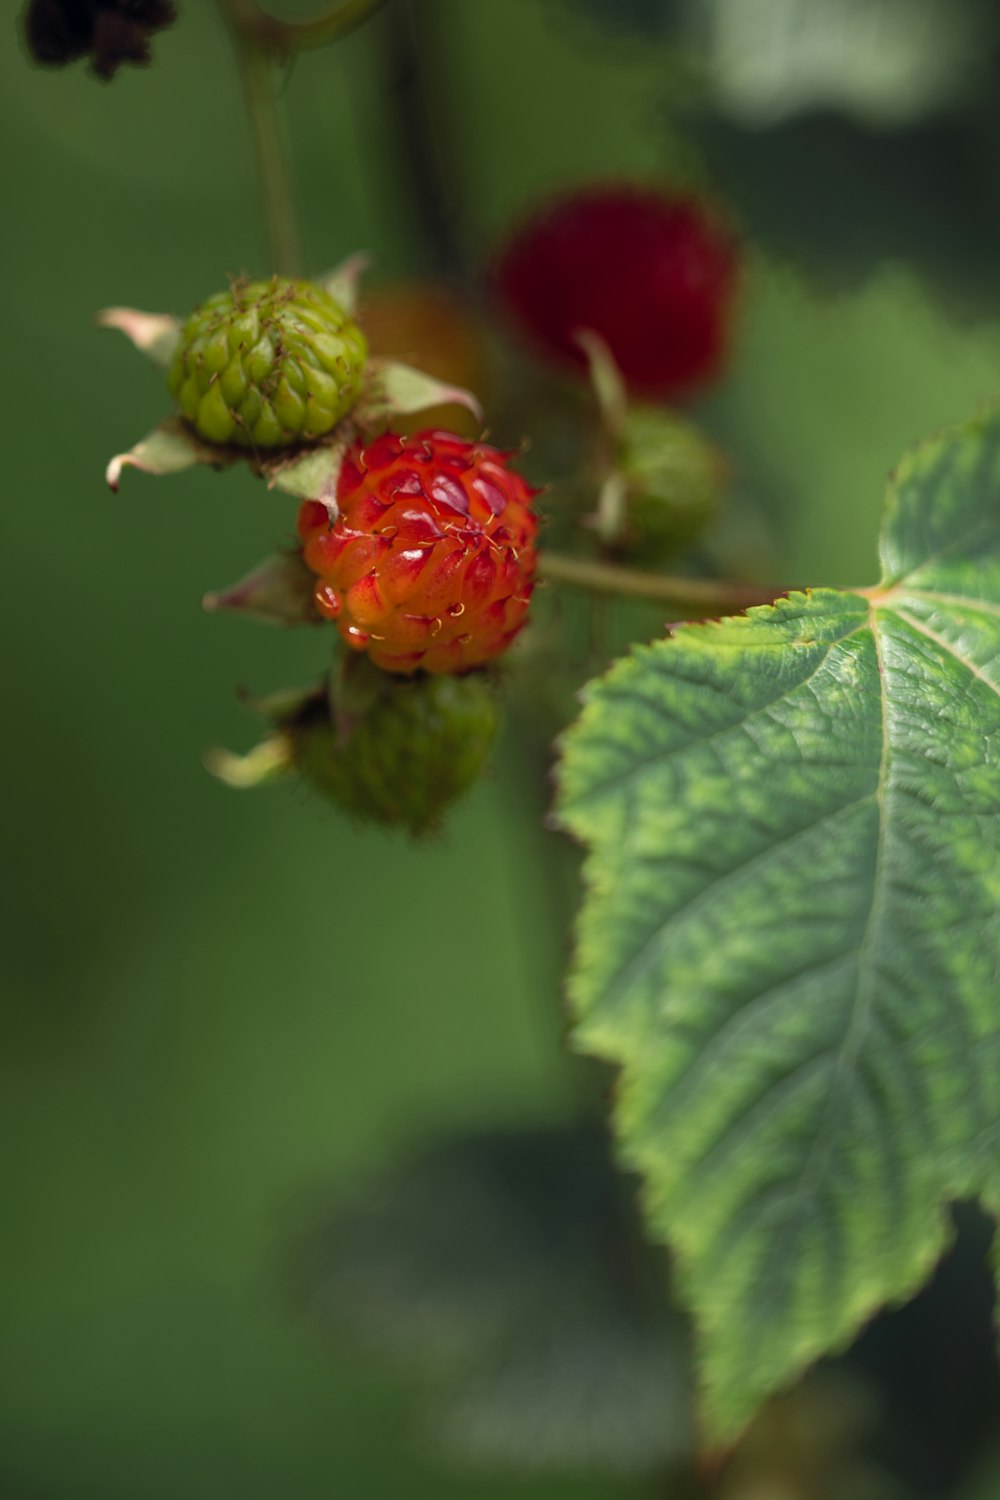 a close up of a raspberry on a branch with leaves